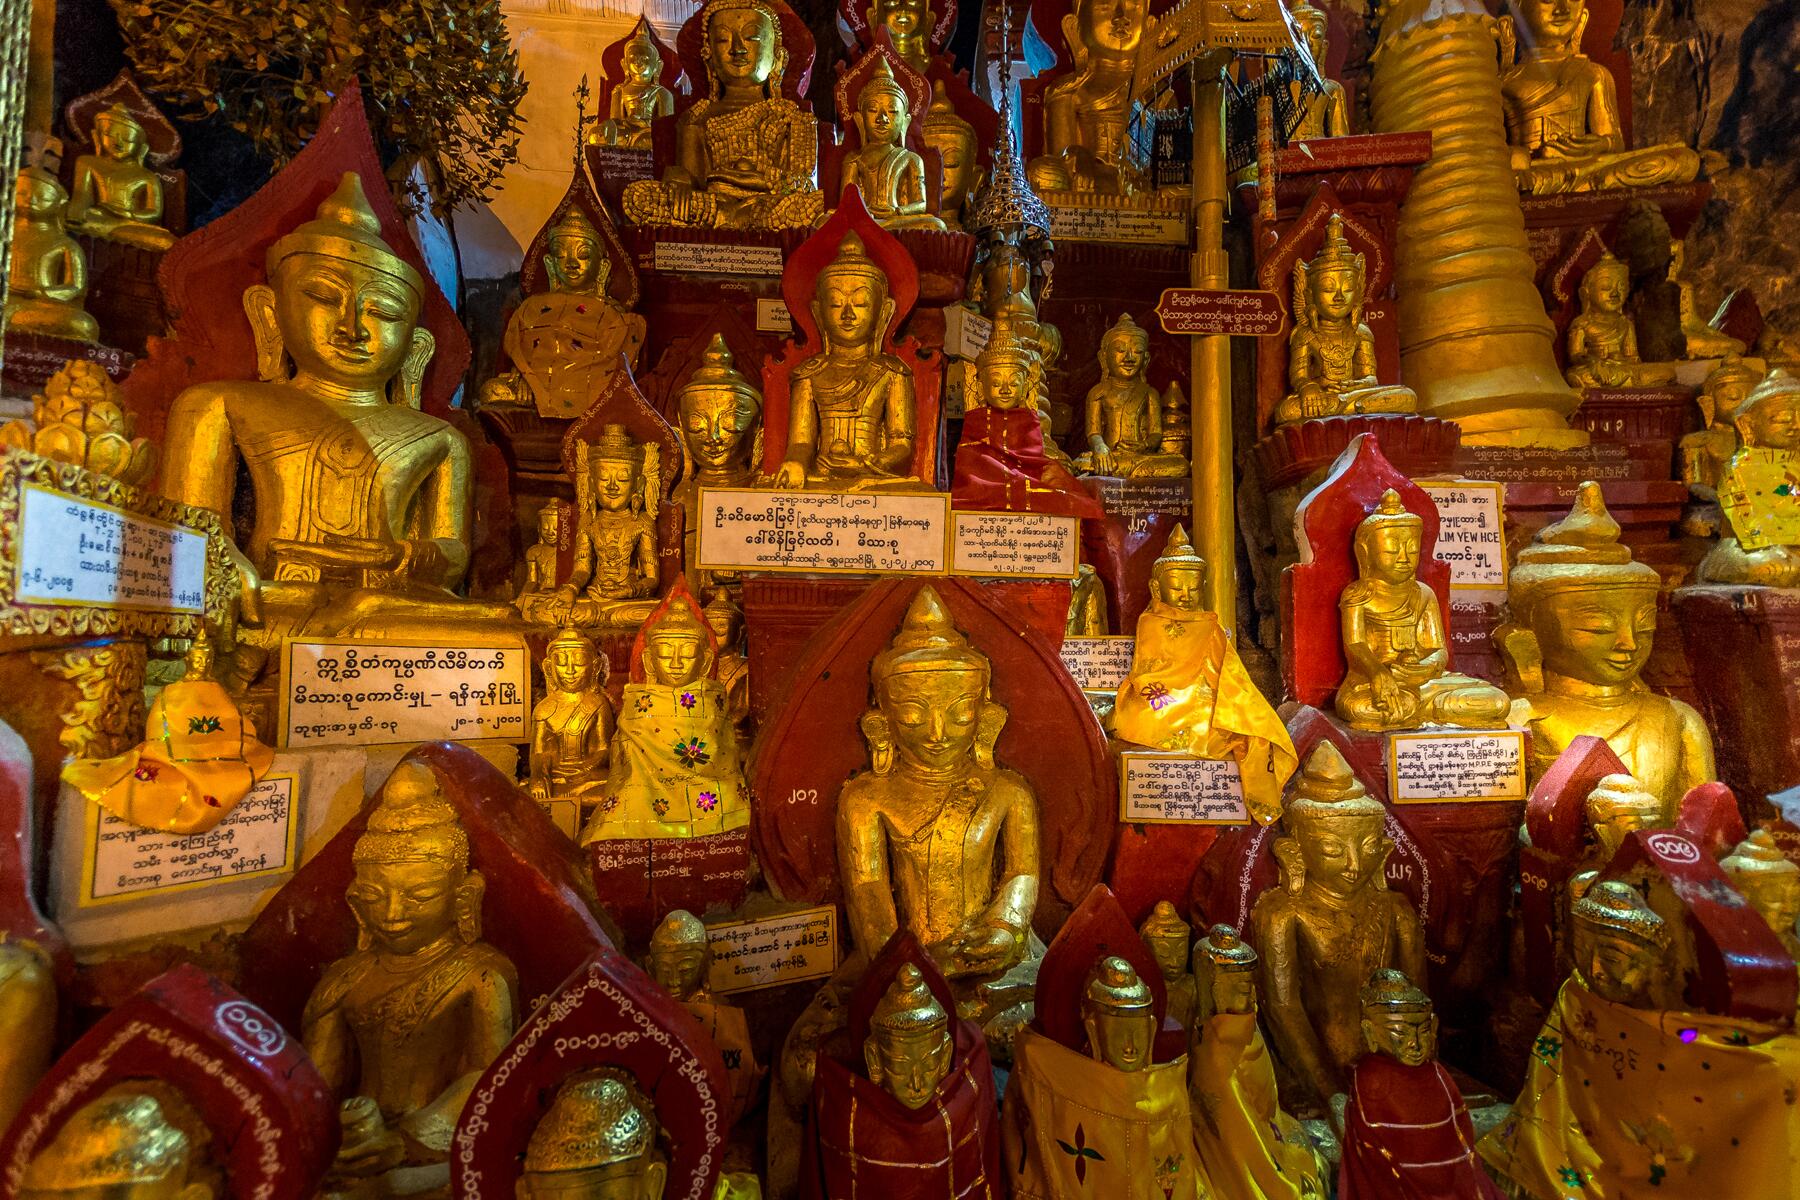 3. Buddhas inside the cave